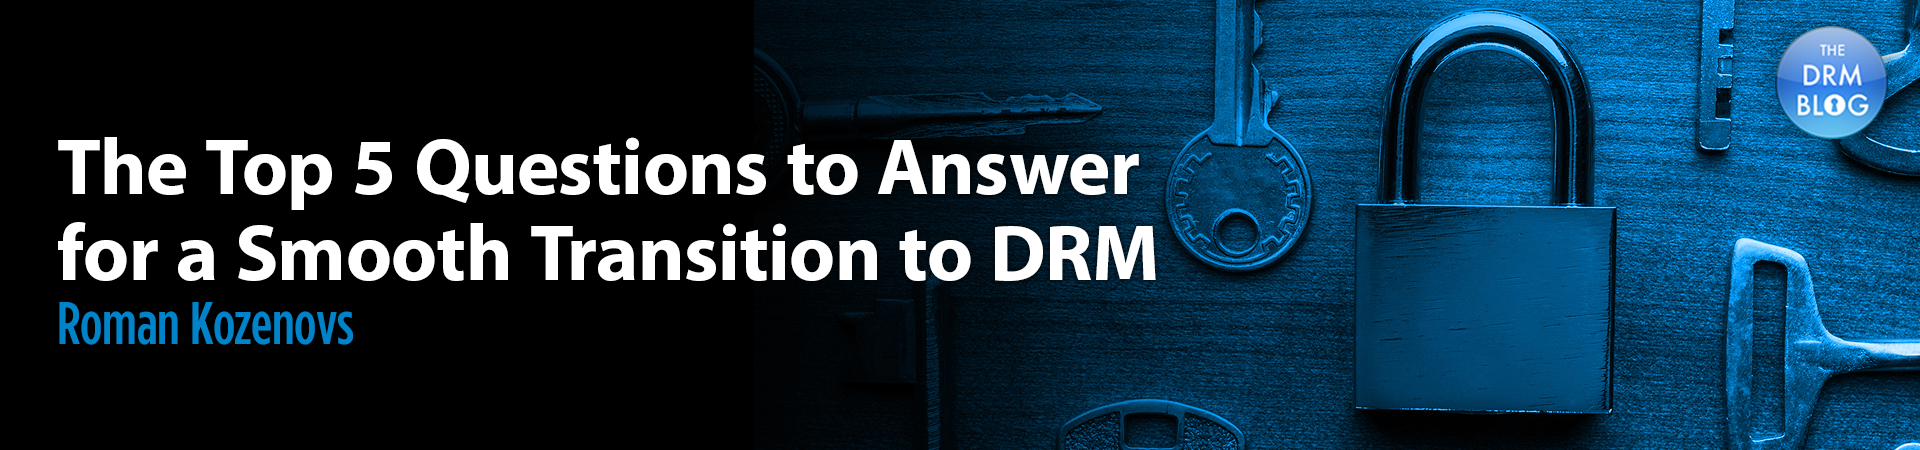 BuyDRM_Top5QuestionsSmoothTransitiontoDRM_1920x450